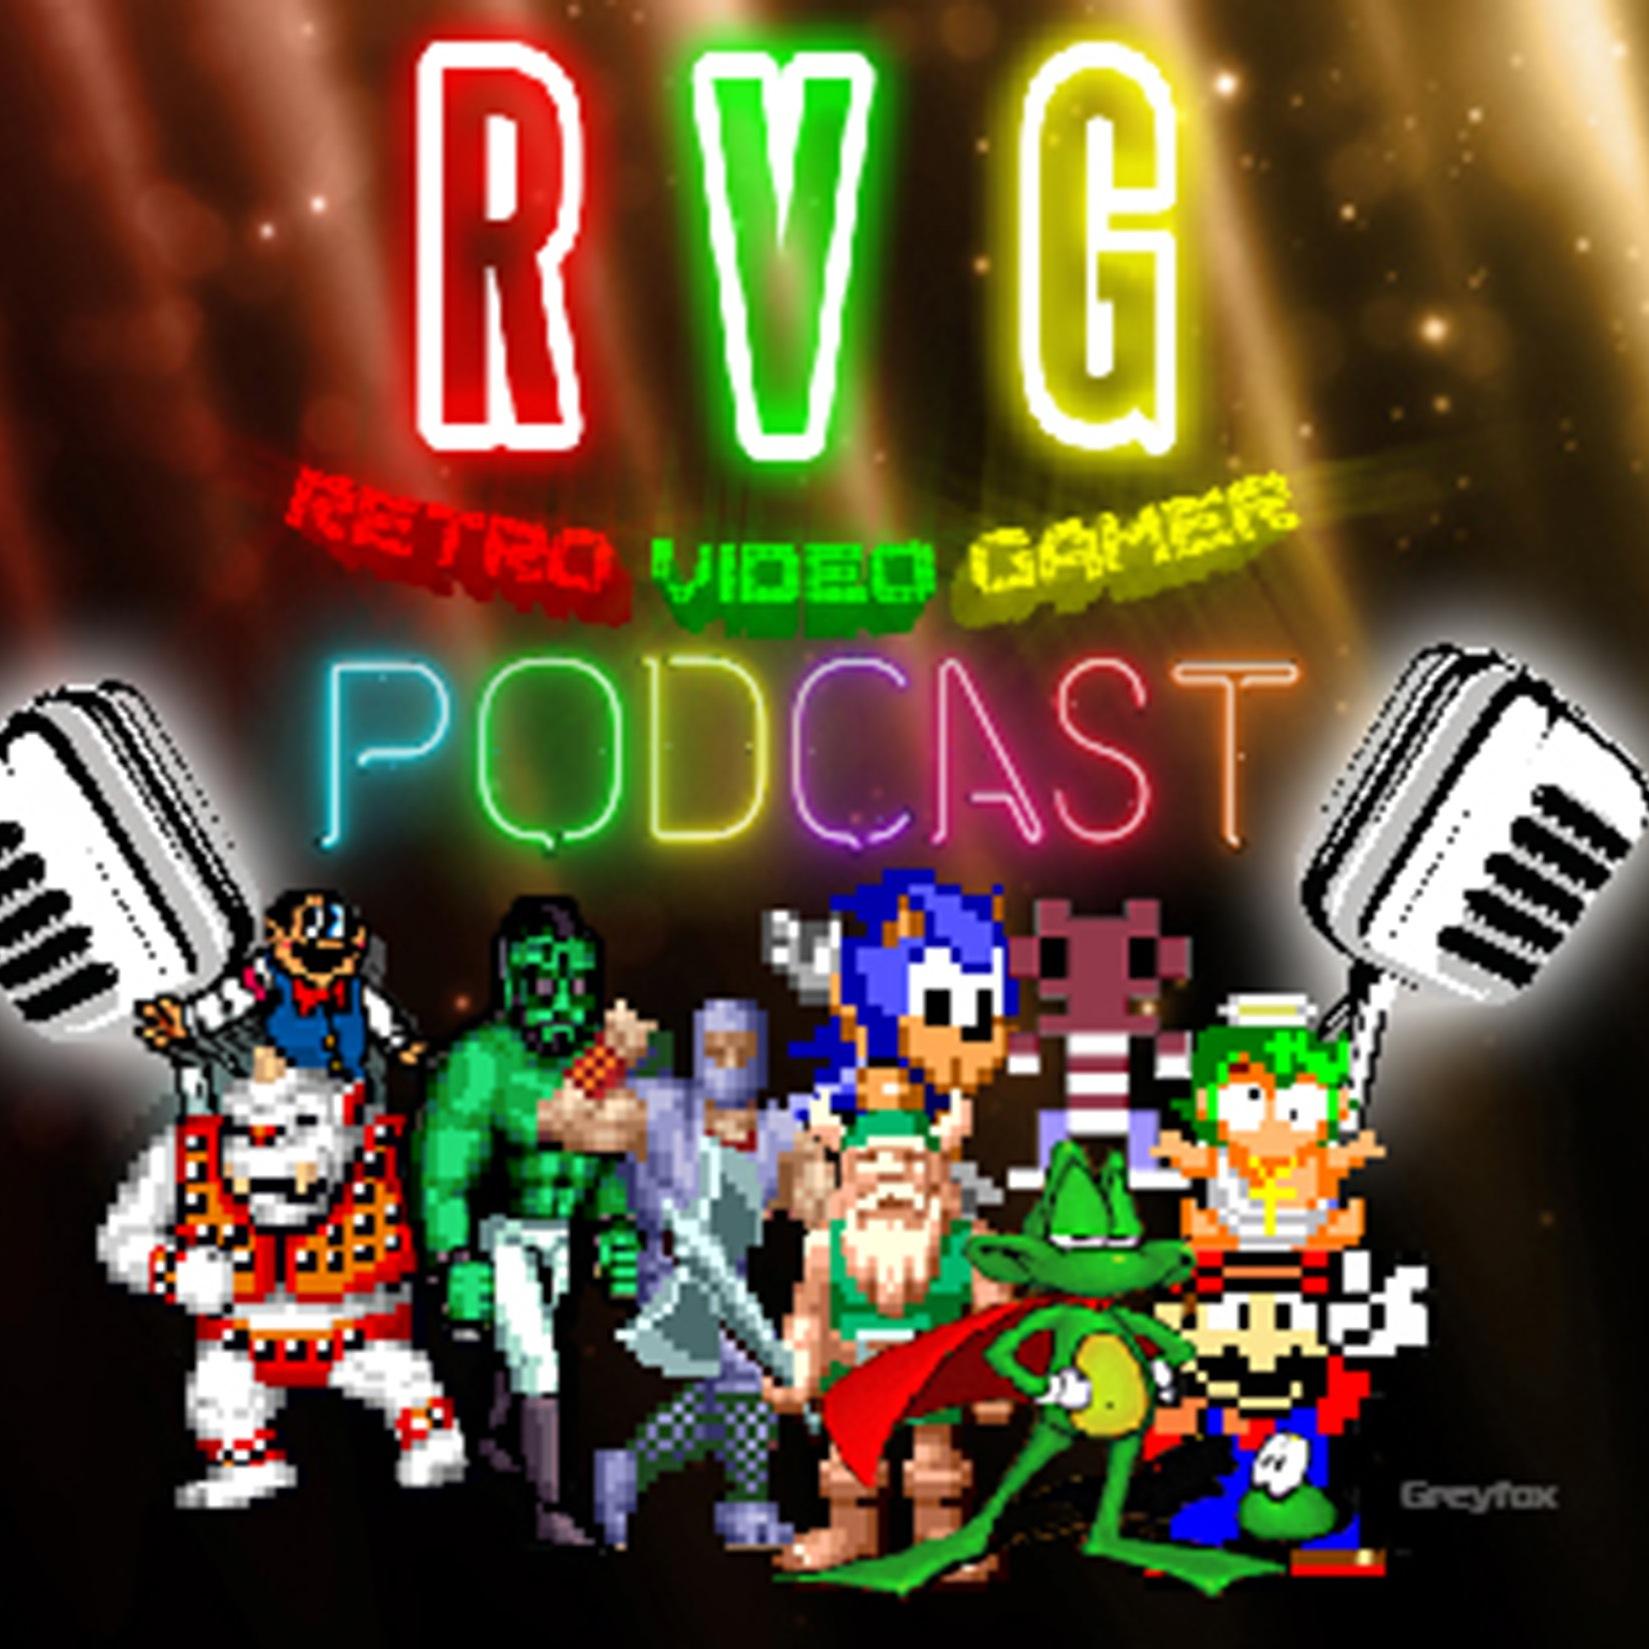 RVG Podcast is a regular retro gaming podcast covering the last 35 years, join the guys from RVG as they explore retro nostalgia. https://t.co/pcqlxy7iQB